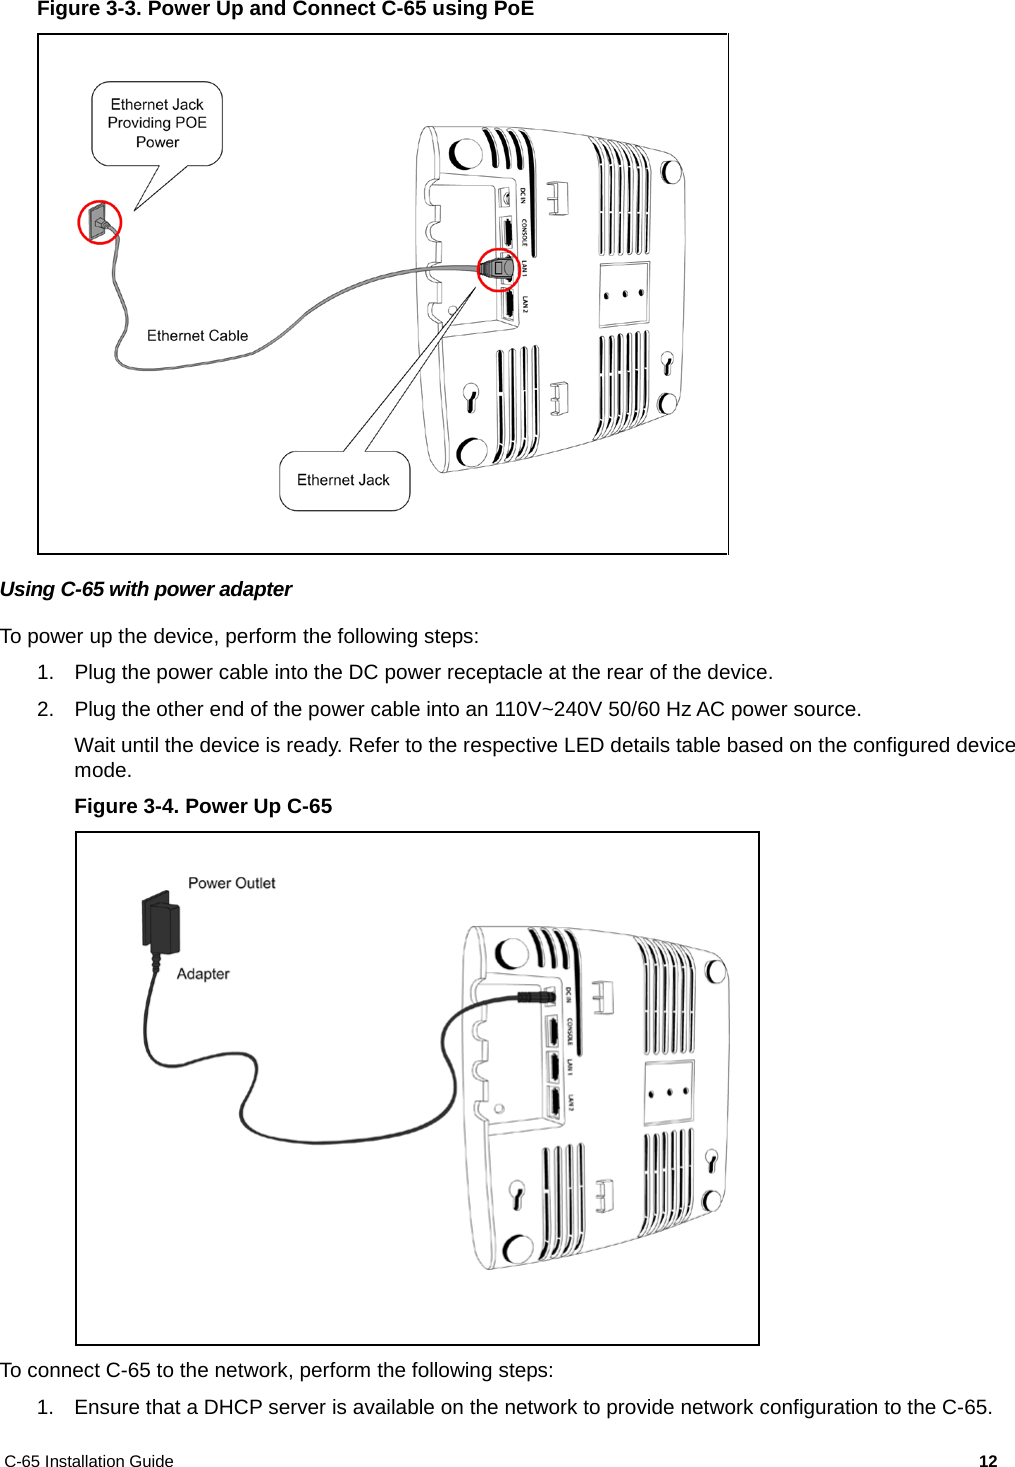 C-65 Installation Guide        12  Figure 3-3. Power Up and Connect C-65 using PoE  Using C-65 with power adapter To power up the device, perform the following steps: 1. Plug the power cable into the DC power receptacle at the rear of the device. 2. Plug the other end of the power cable into an 110V~240V 50/60 Hz AC power source. Wait until the device is ready. Refer to the respective LED details table based on the configured device mode. Figure 3-4. Power Up C-65  To connect C-65 to the network, perform the following steps: 1. Ensure that a DHCP server is available on the network to provide network configuration to the C-65. 